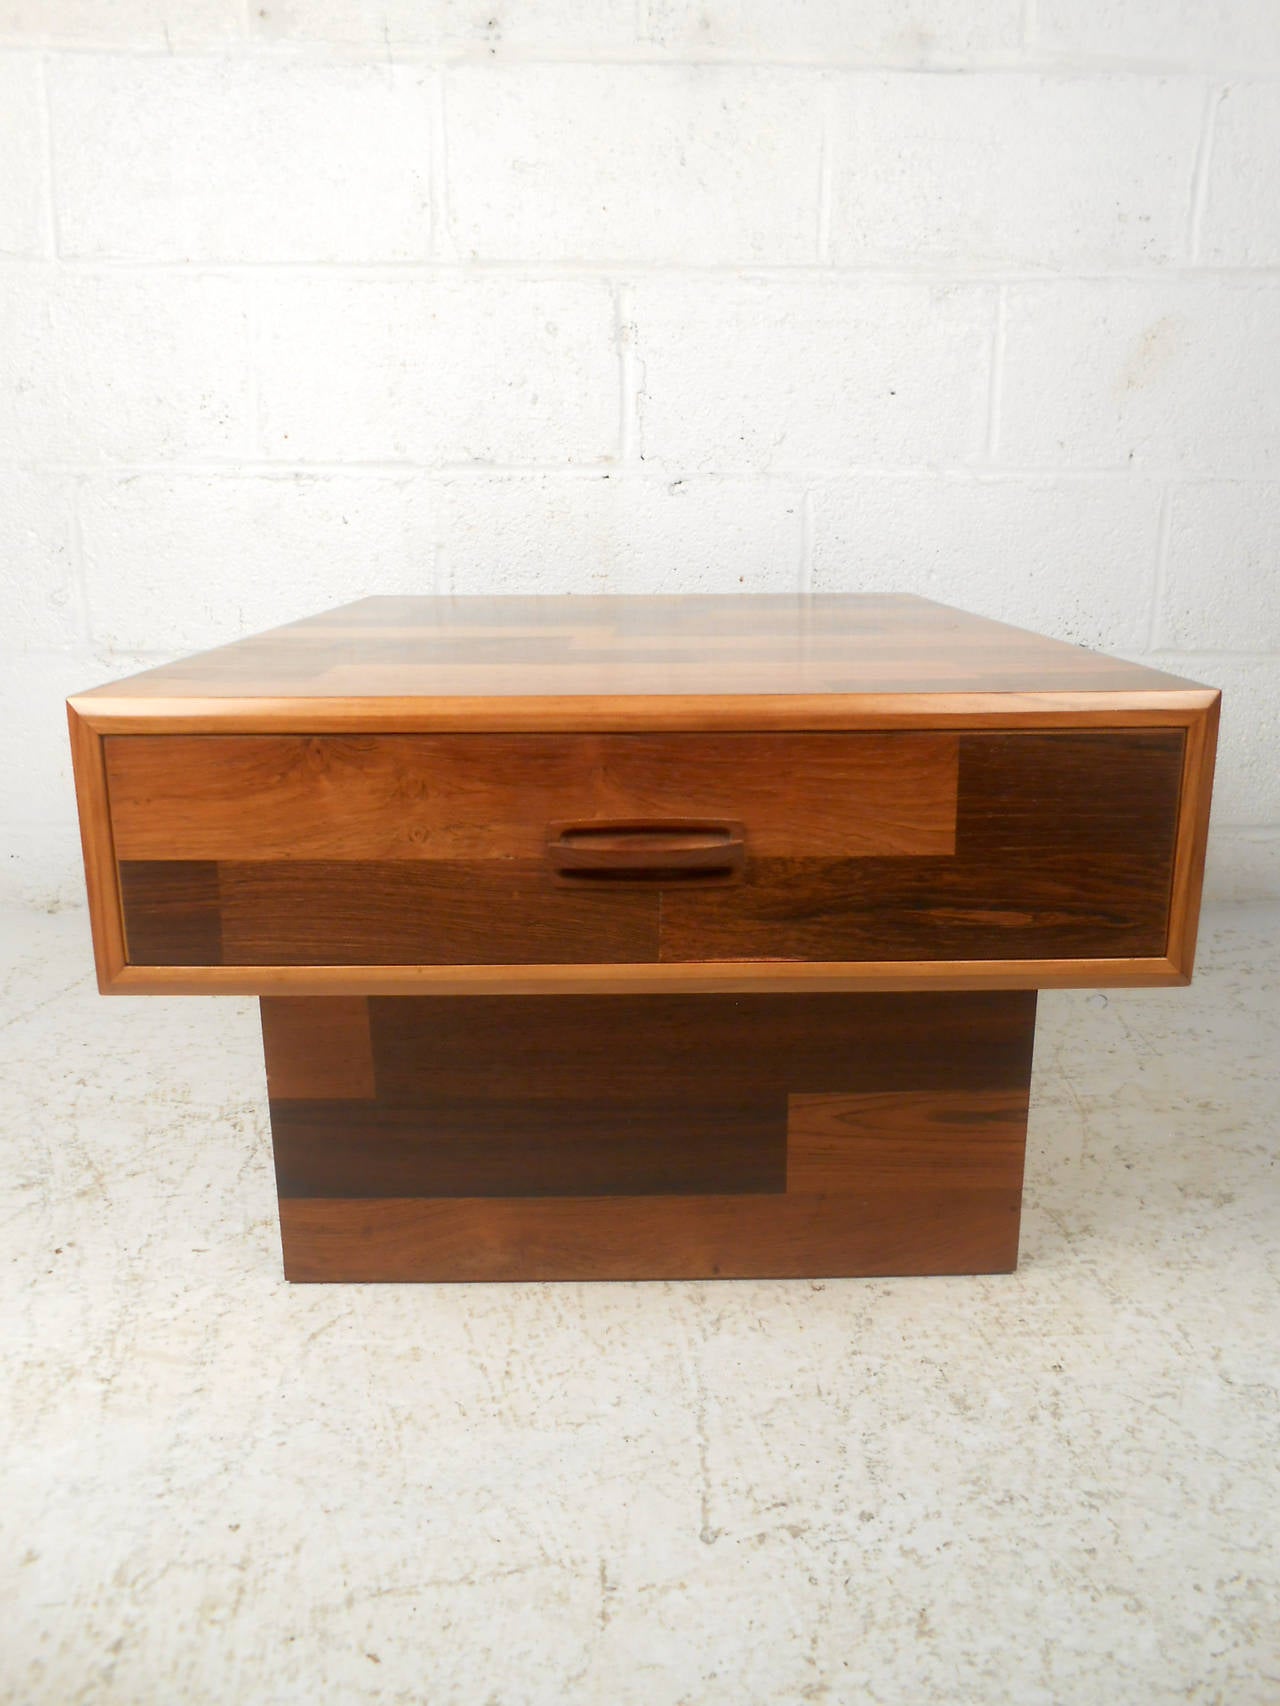 This mid-century modern end table features a unique patchwork finish, single drawer, and carved wood pull, which offers a distinct modern flare to any home or office space.

Please confirm item location (NY or NJ) with dealer.